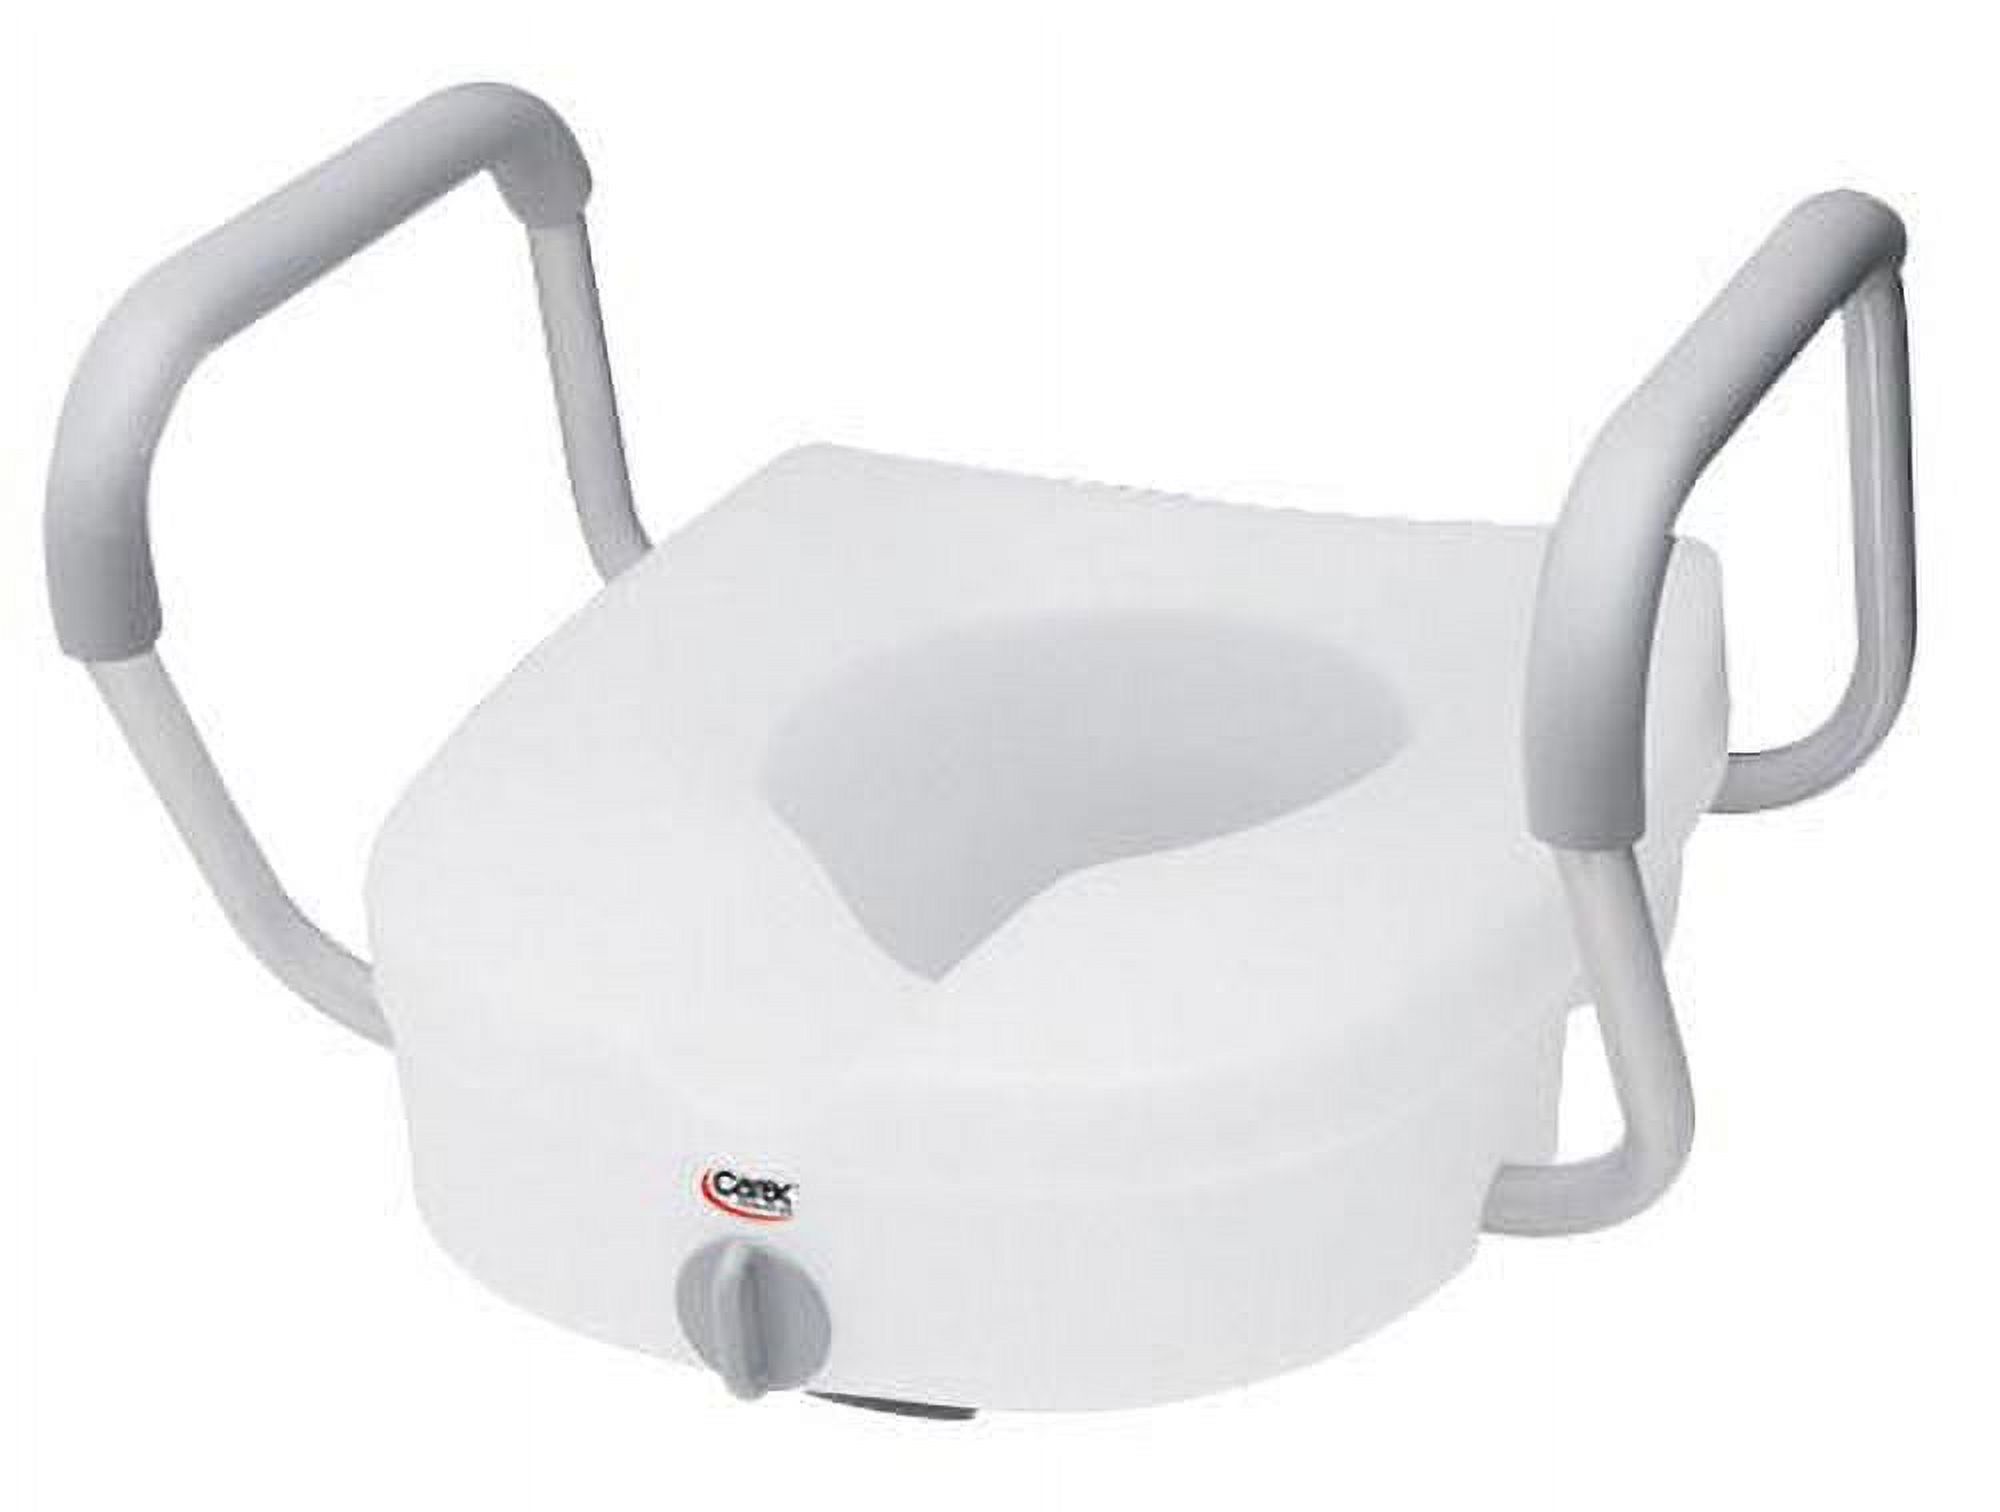 Carex EZ Lock Raised Toilet Seat with Handles, Adjustable Removable Arms, Adds 5", 300 lb Capacity - image 1 of 5